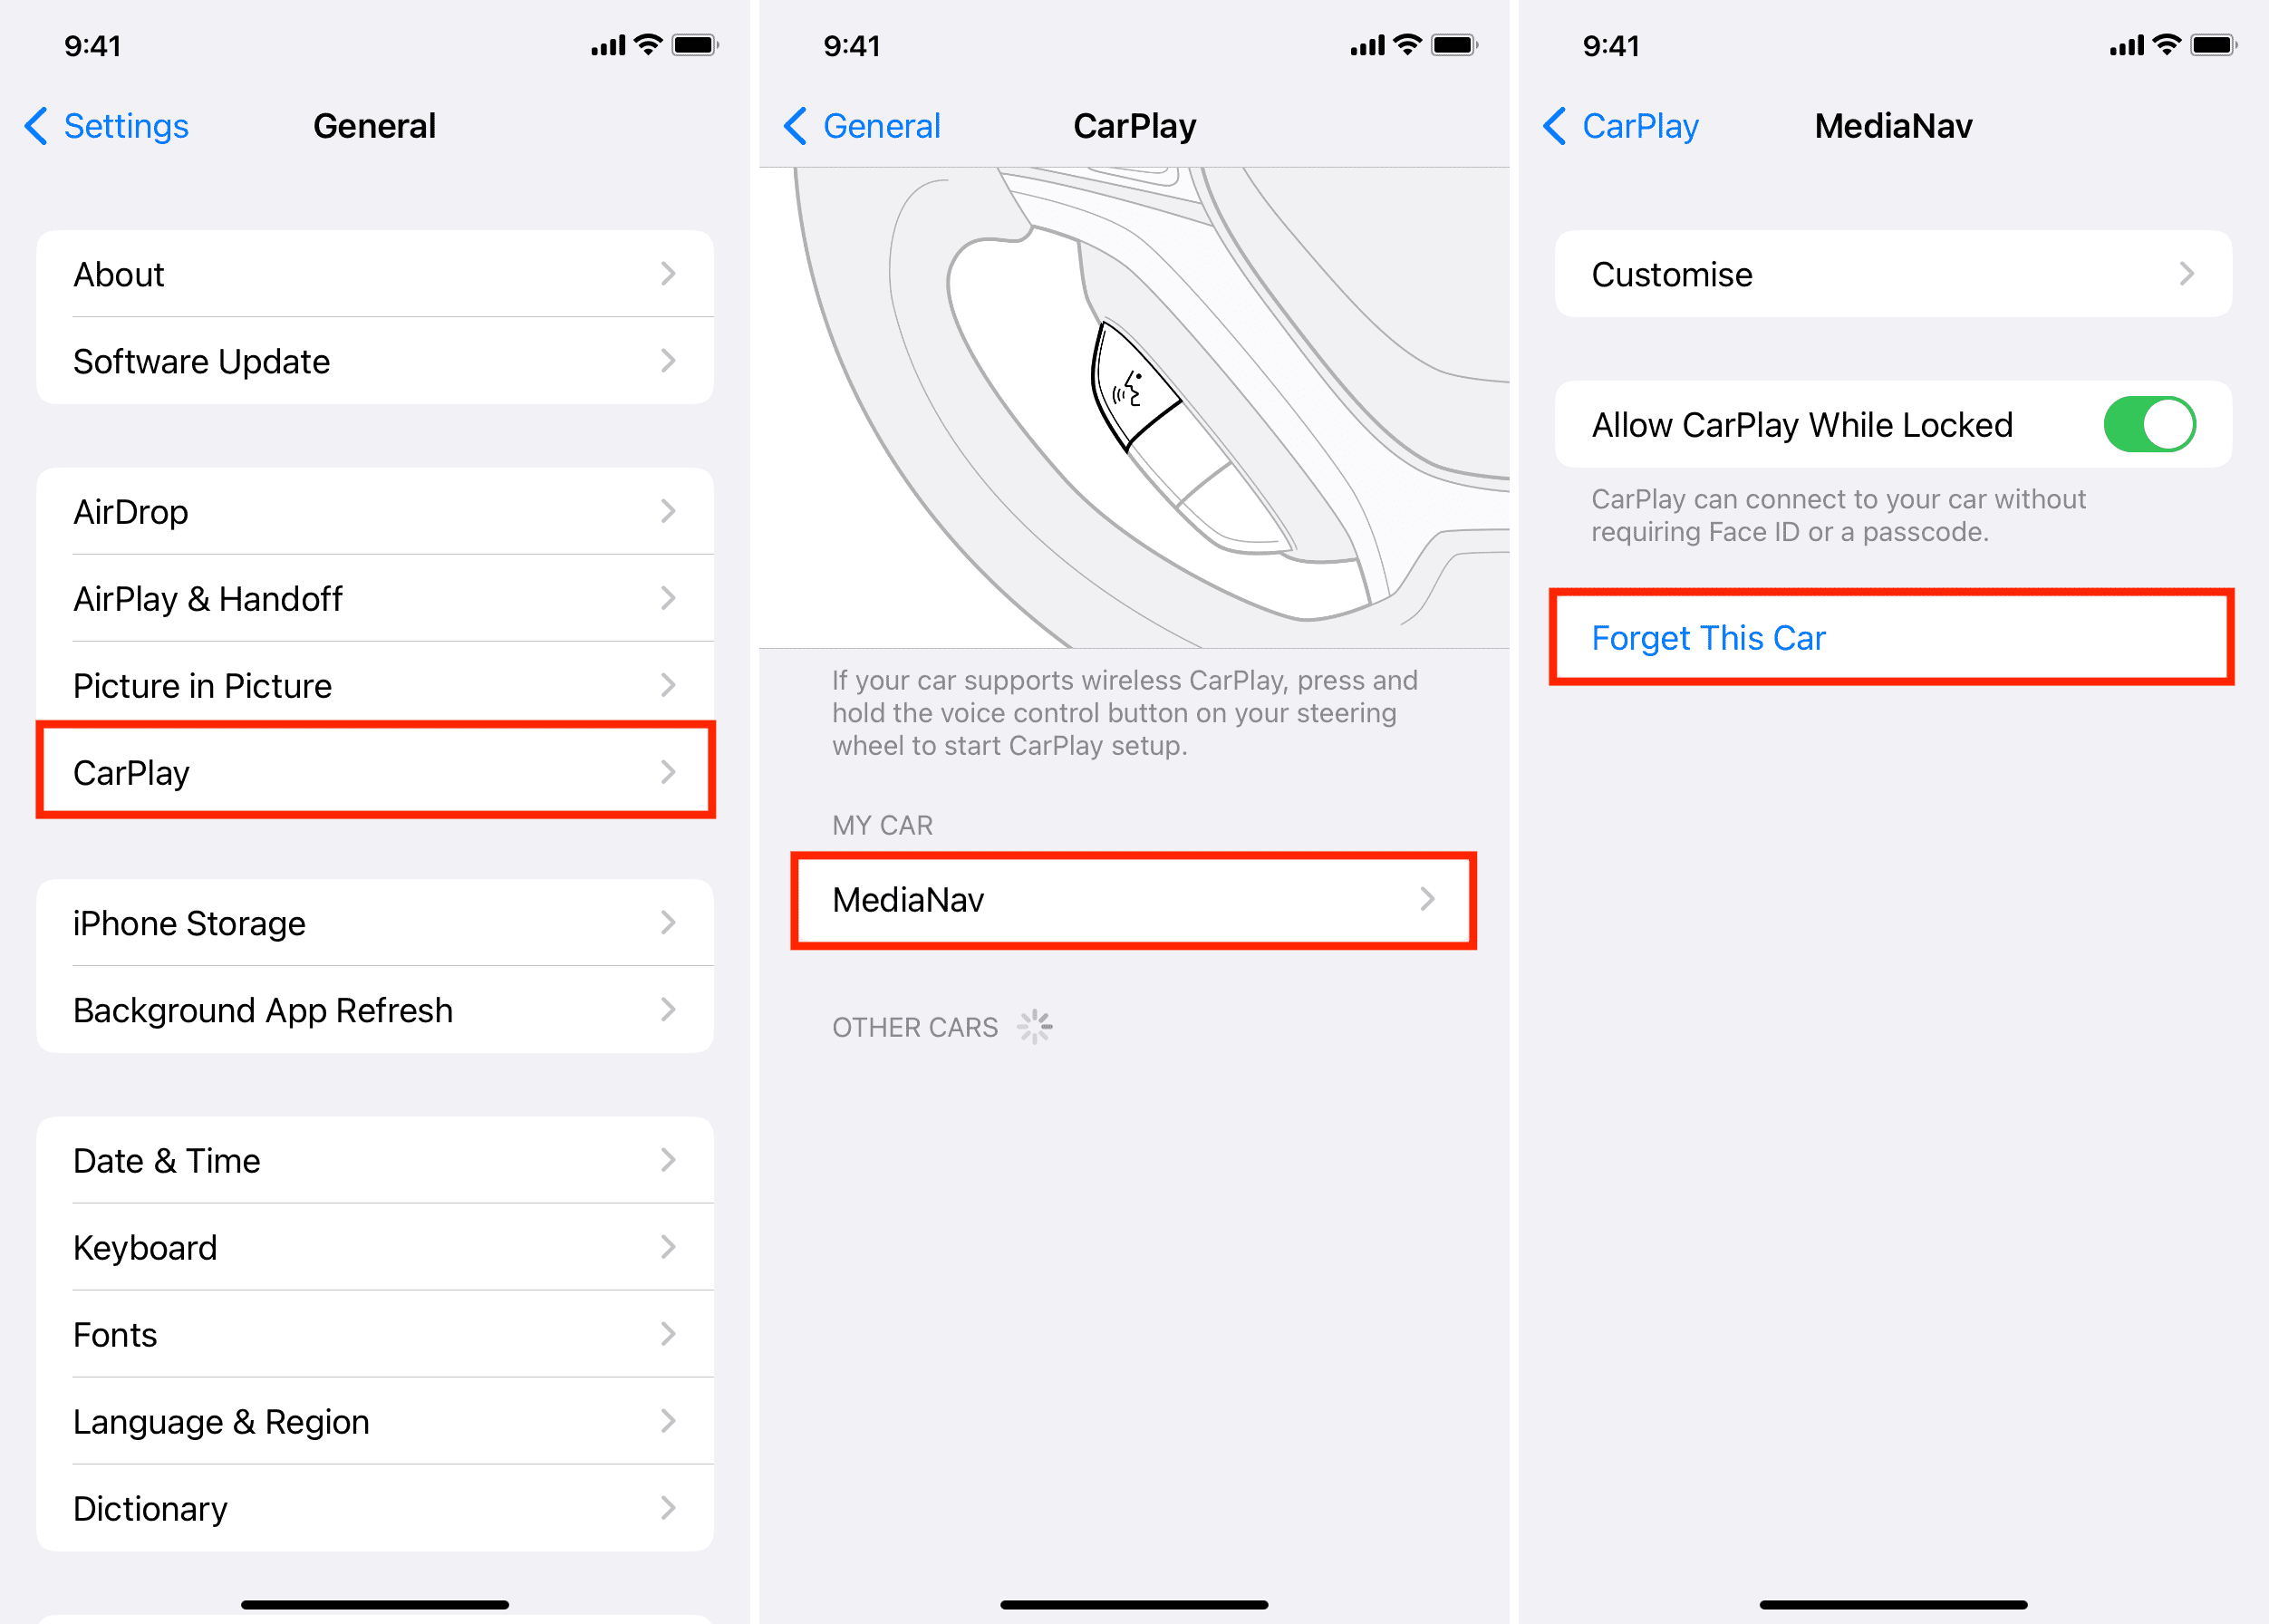 Forget This Car in iPhone settings to turn off CarPlay